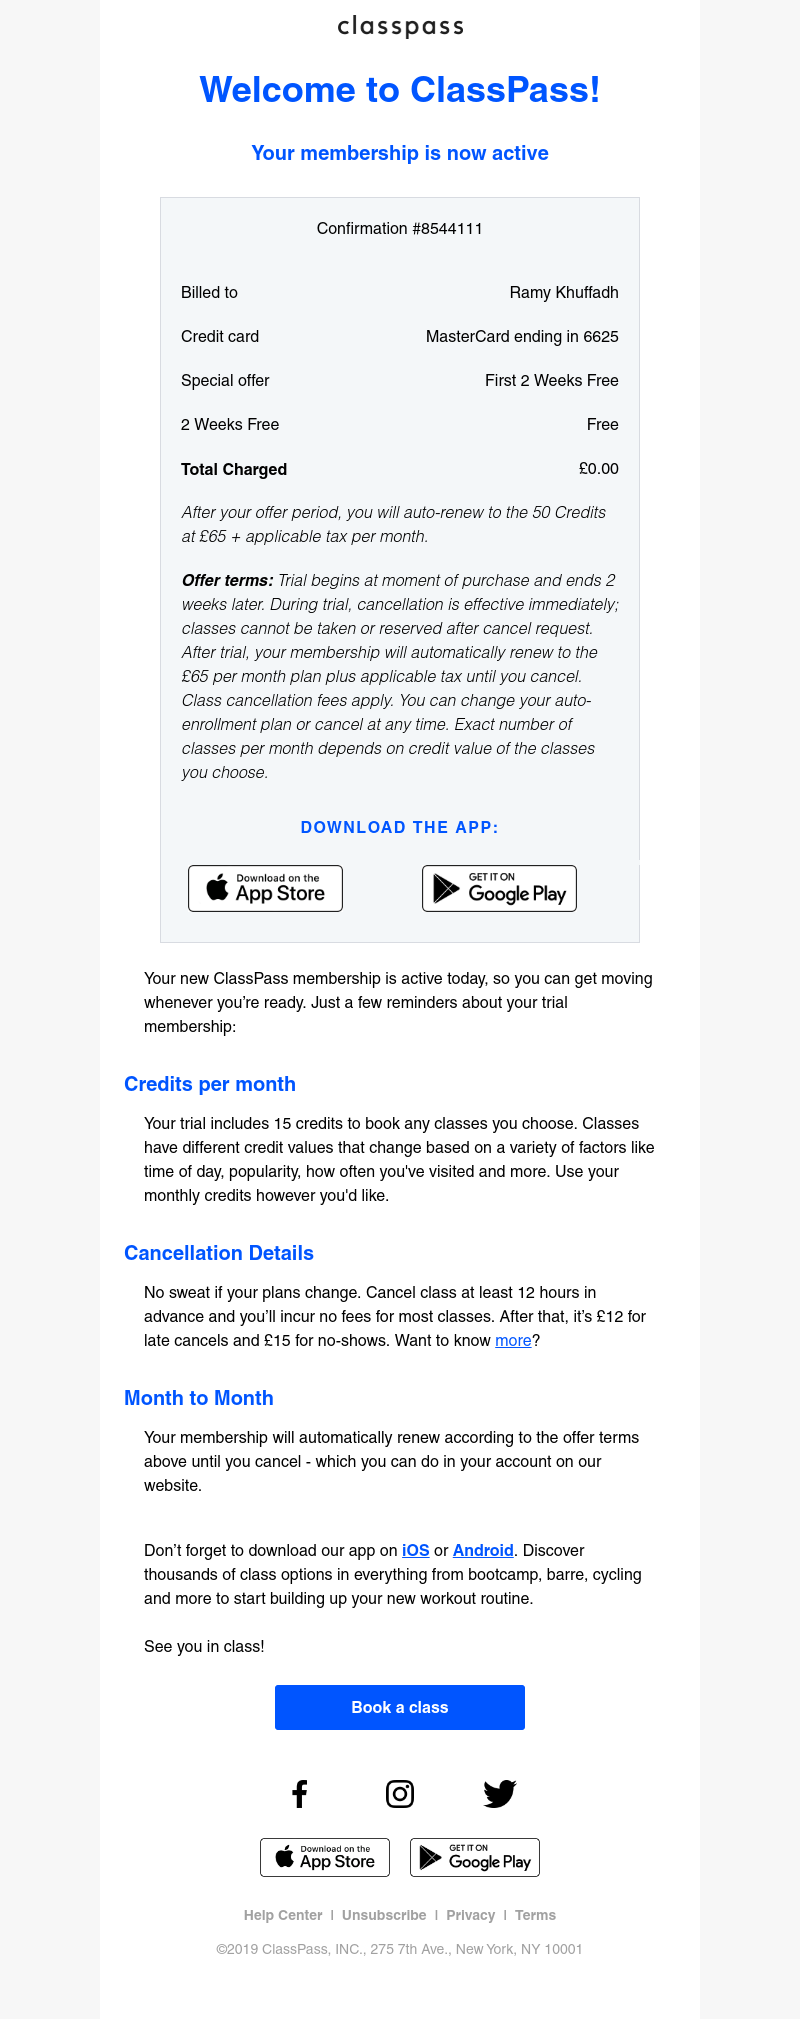 Screenshot of email with subject /media/emails/7f09010a-a715-4118-96f3-ef3392303989.png